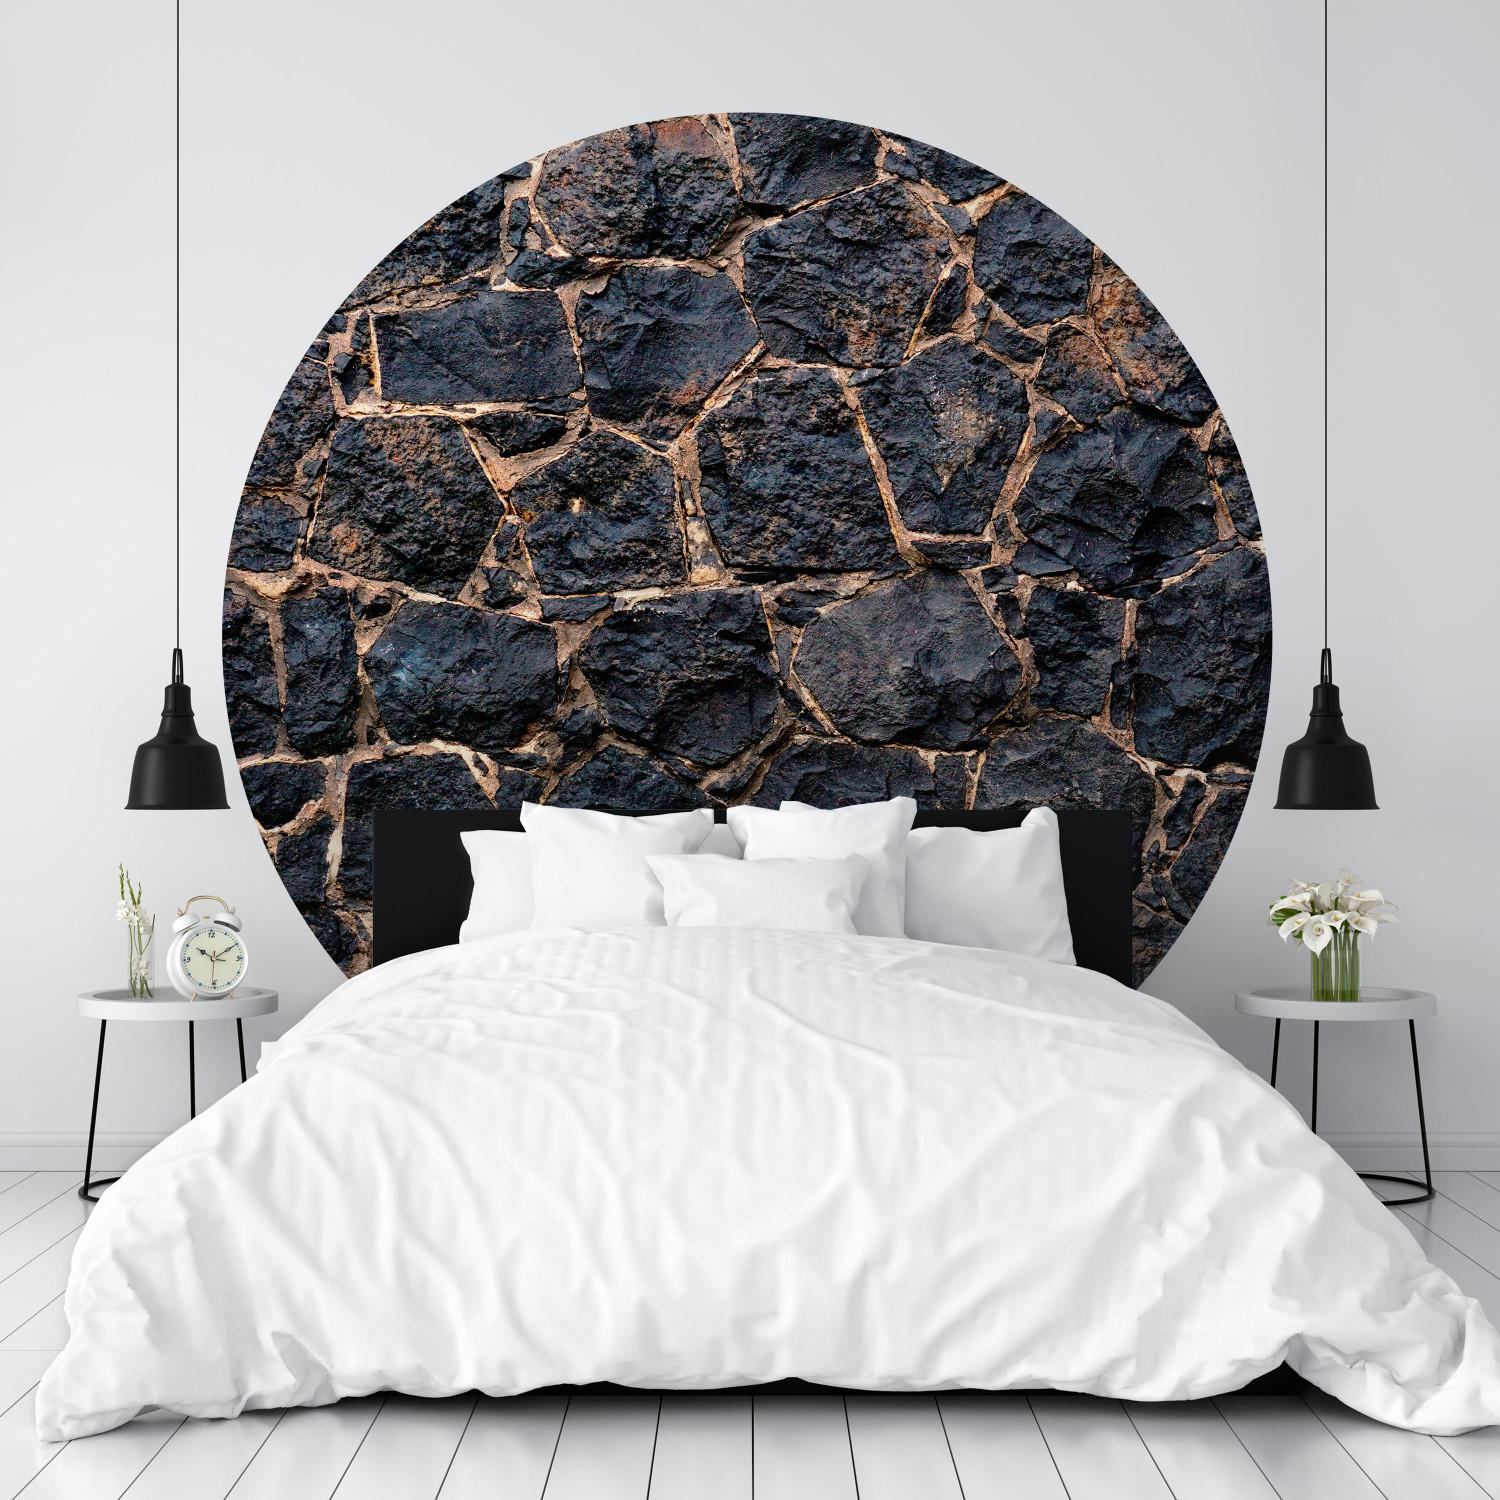 Fotomurales redondos Dark Wall - Stone Composition in Graphite and Black Tones